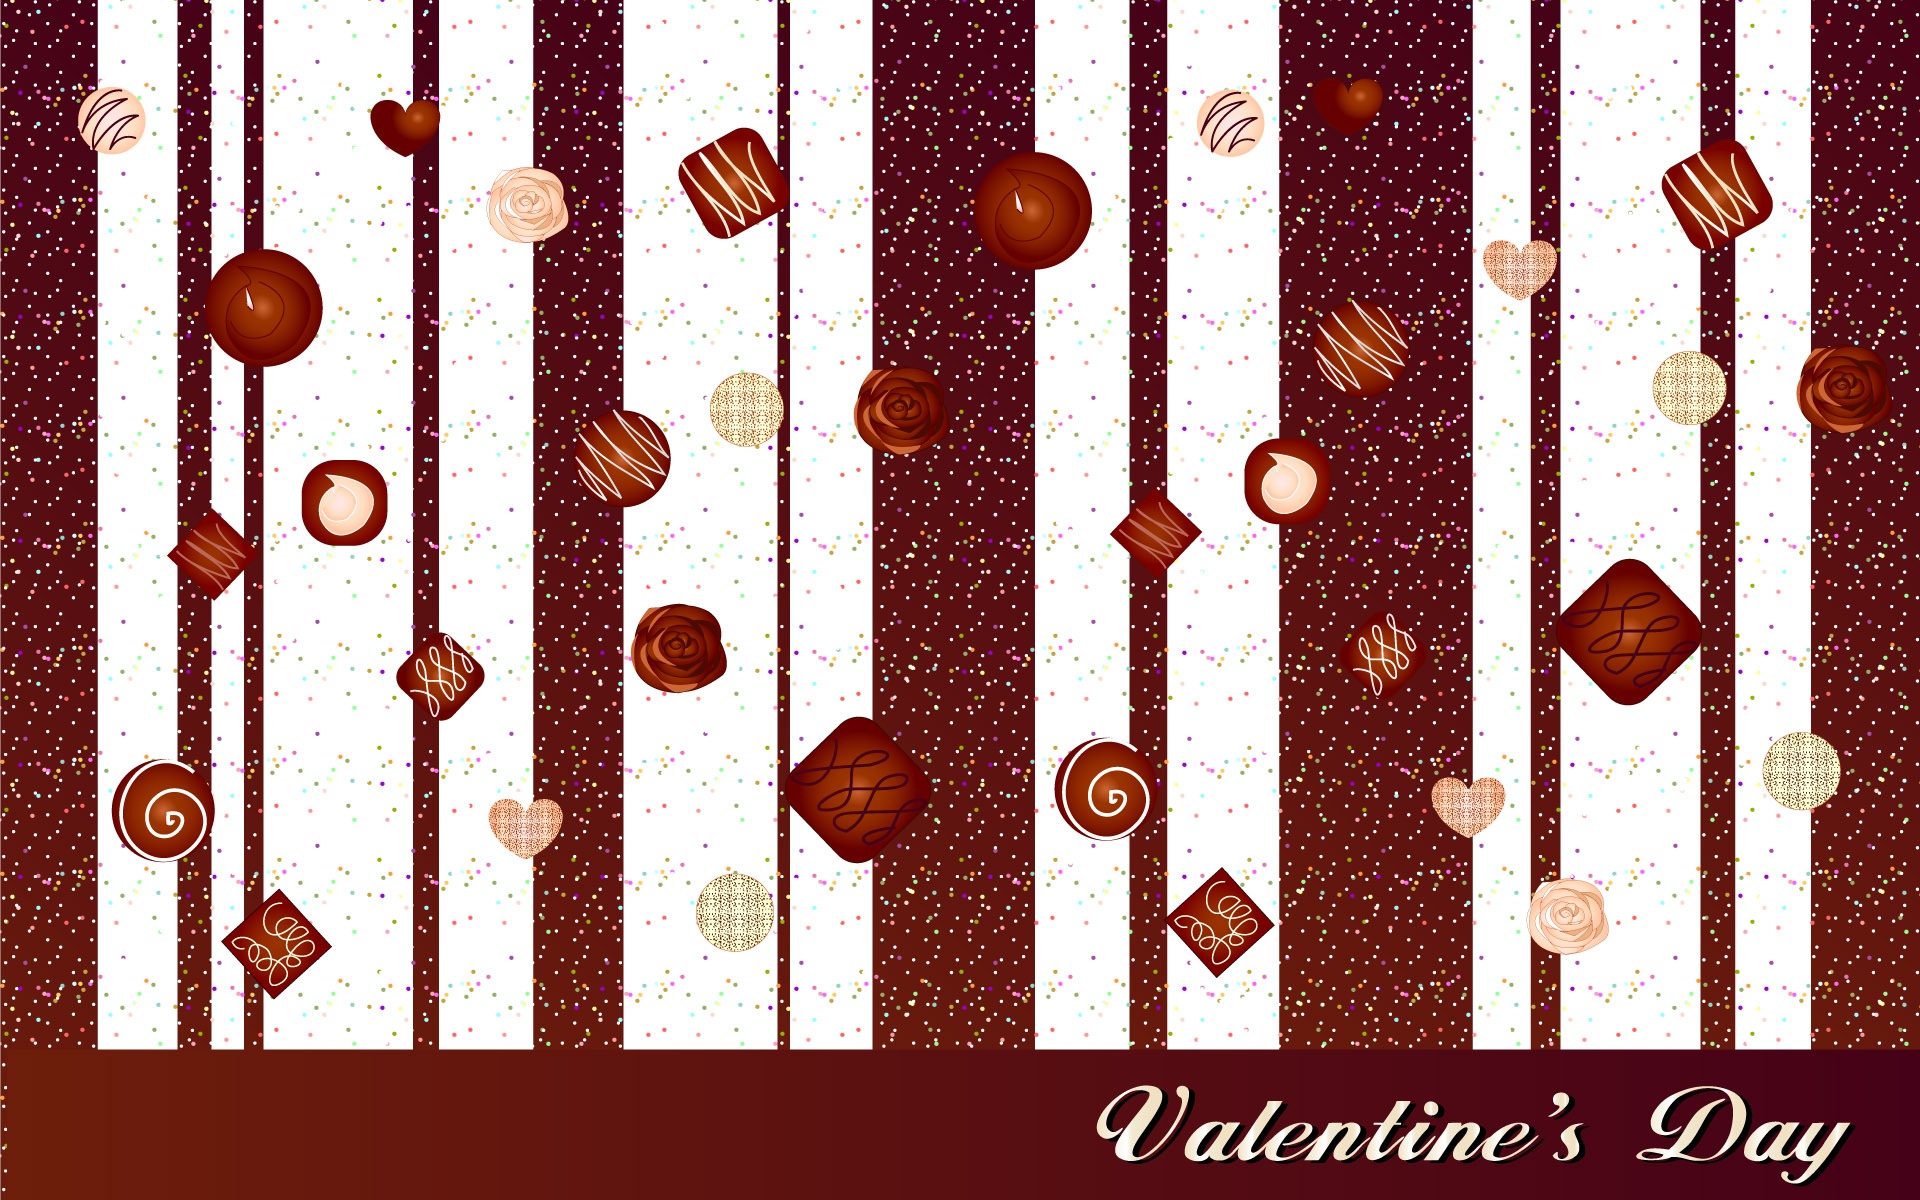 Valentine's Day Theme Wallpapers (1) #18 - 1920x1200